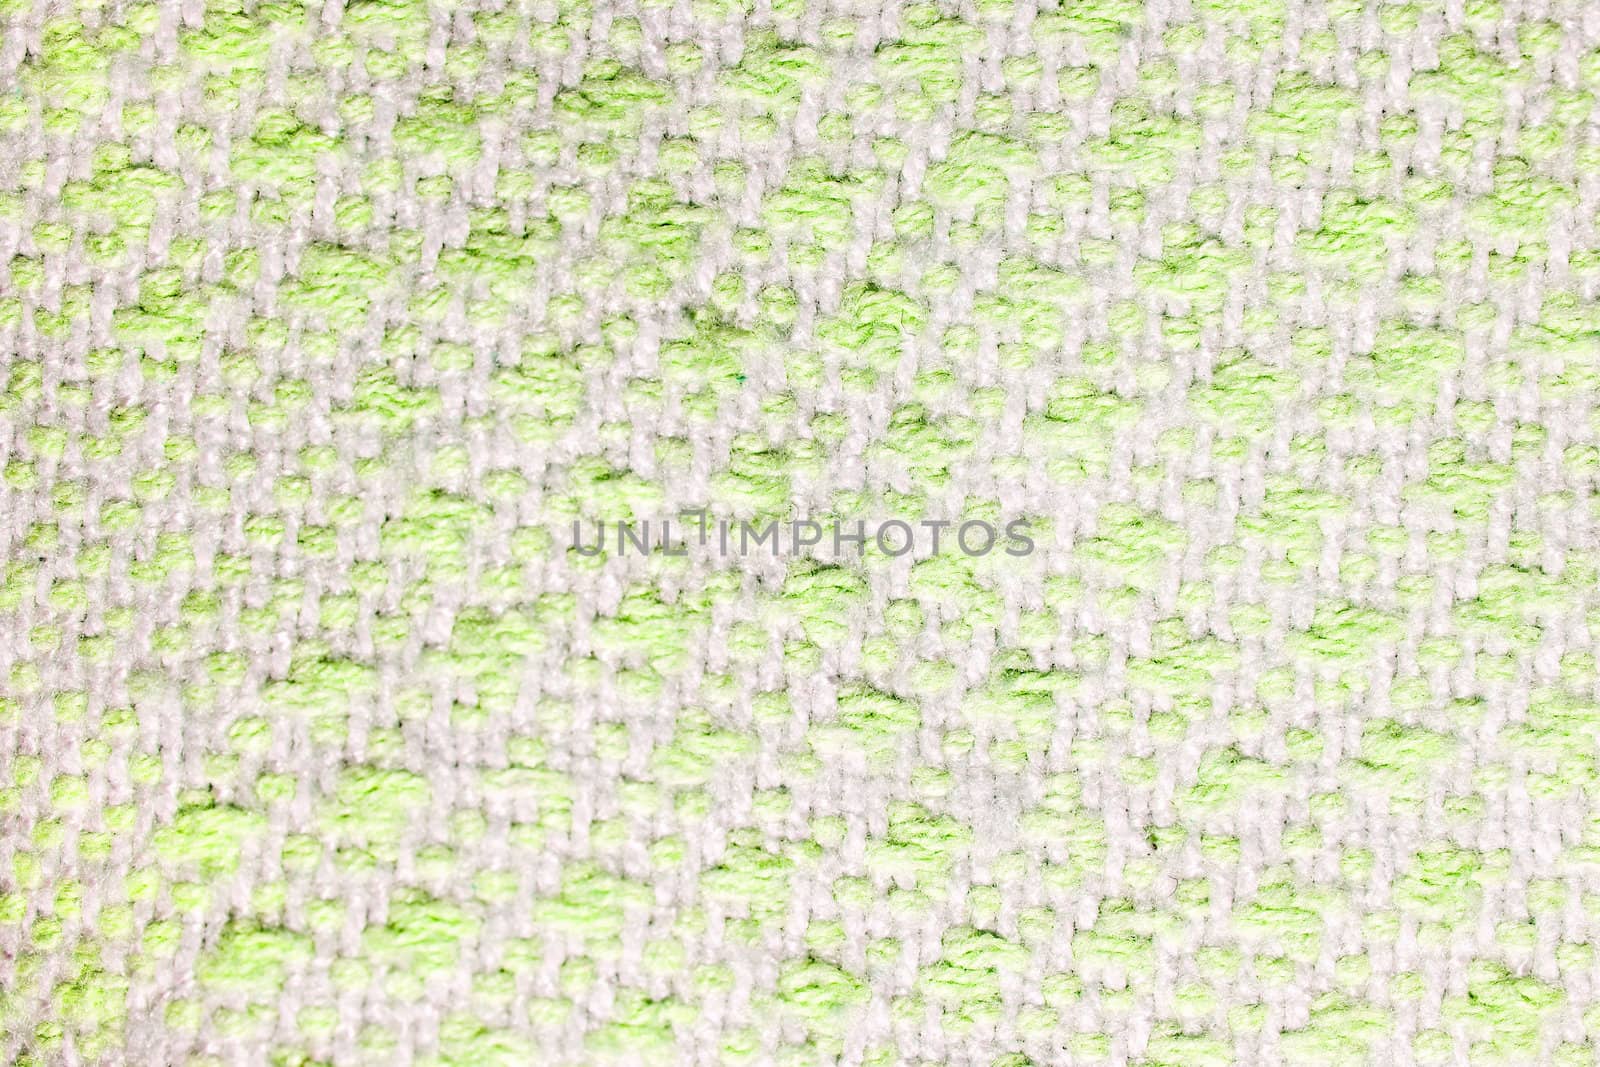 woolen fabric with color blotches